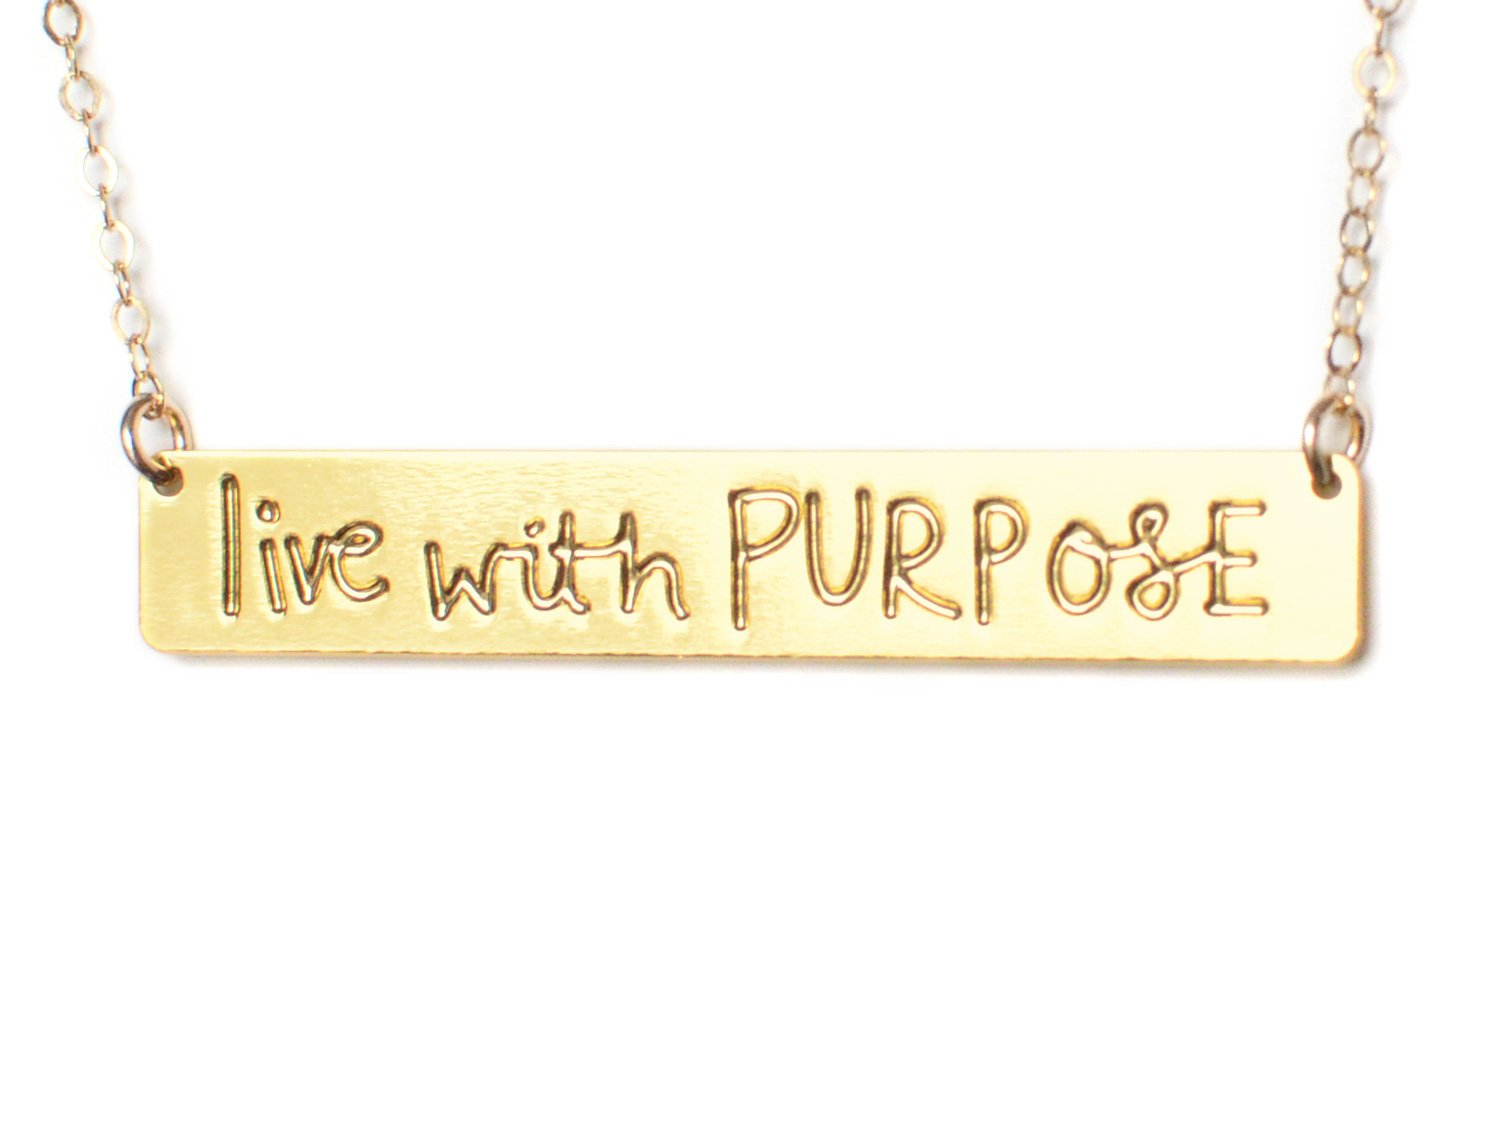 Live With Purpose Bar Necklace - High Quality, Affordable, Hand Written, Empowering, Self Love, Mantra Word Necklace - Available in Gold and Silver - Made in USA - Brevity Jewelry